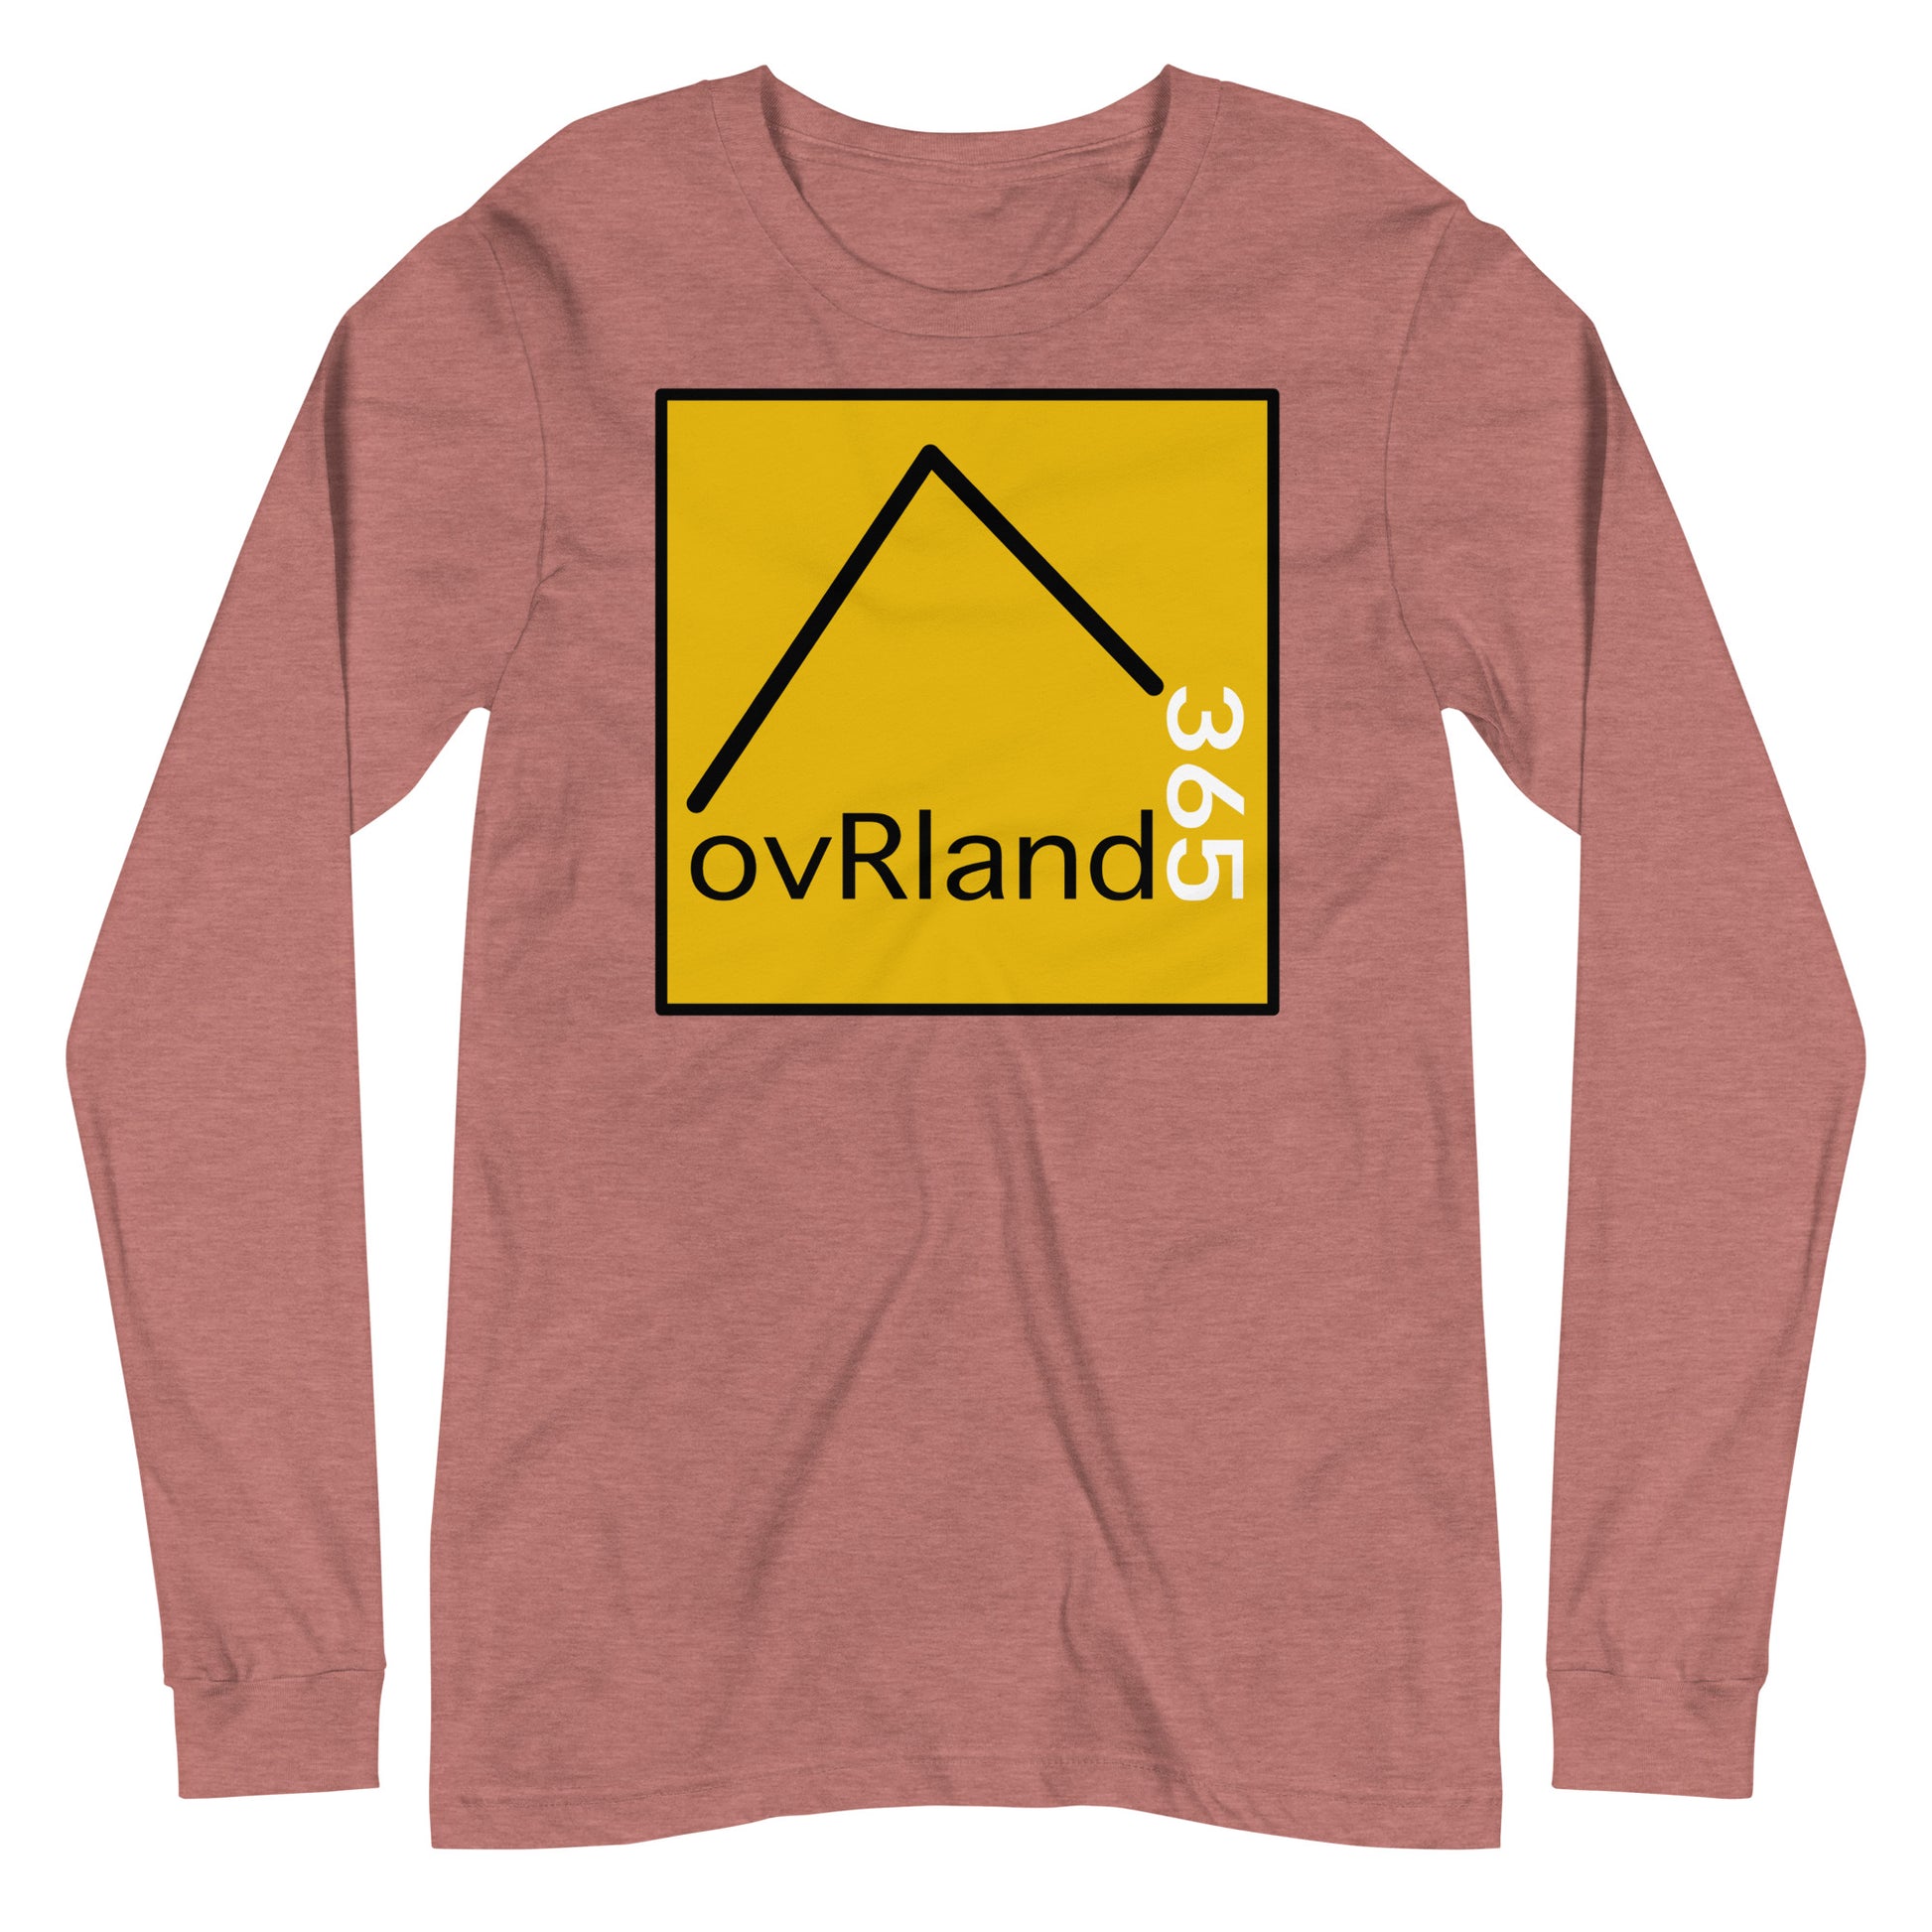 Classic ovRland365 long-sleeve, pink. overland365.com